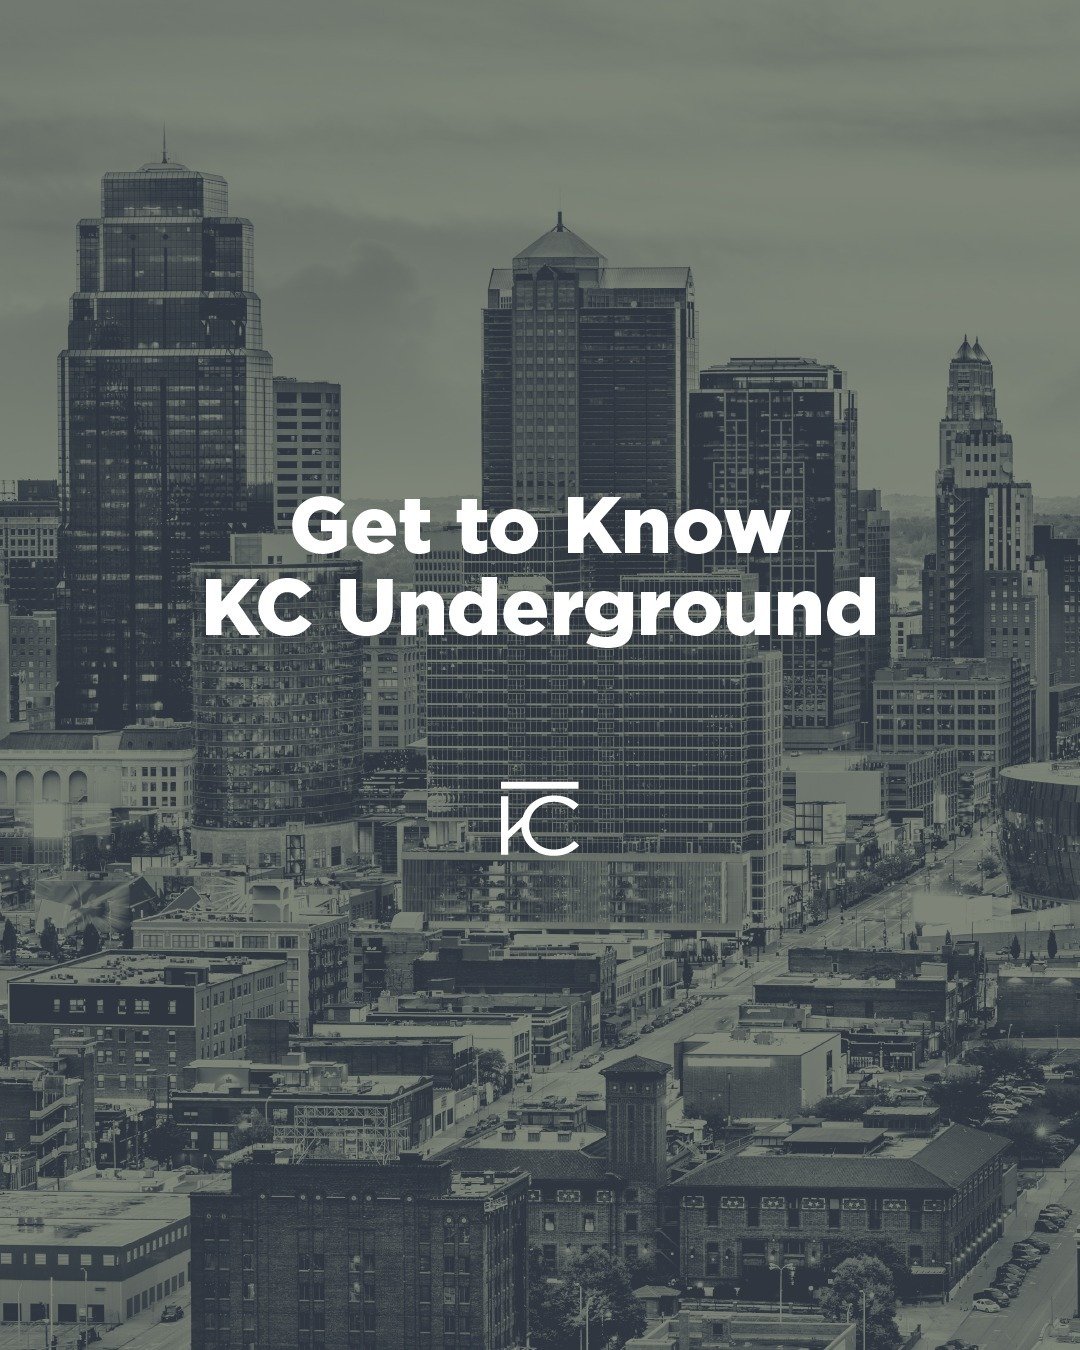 Discover your part in this network!

🤔 Ready to start a microchurch? Let's do it.

🤔 Ready to discover your masterpiece mission? Let's do it!

🤔 Ready to step into the more Jesus has for you? LET'S DO IT!

&quot;Get to Know KC Underground&quot; is